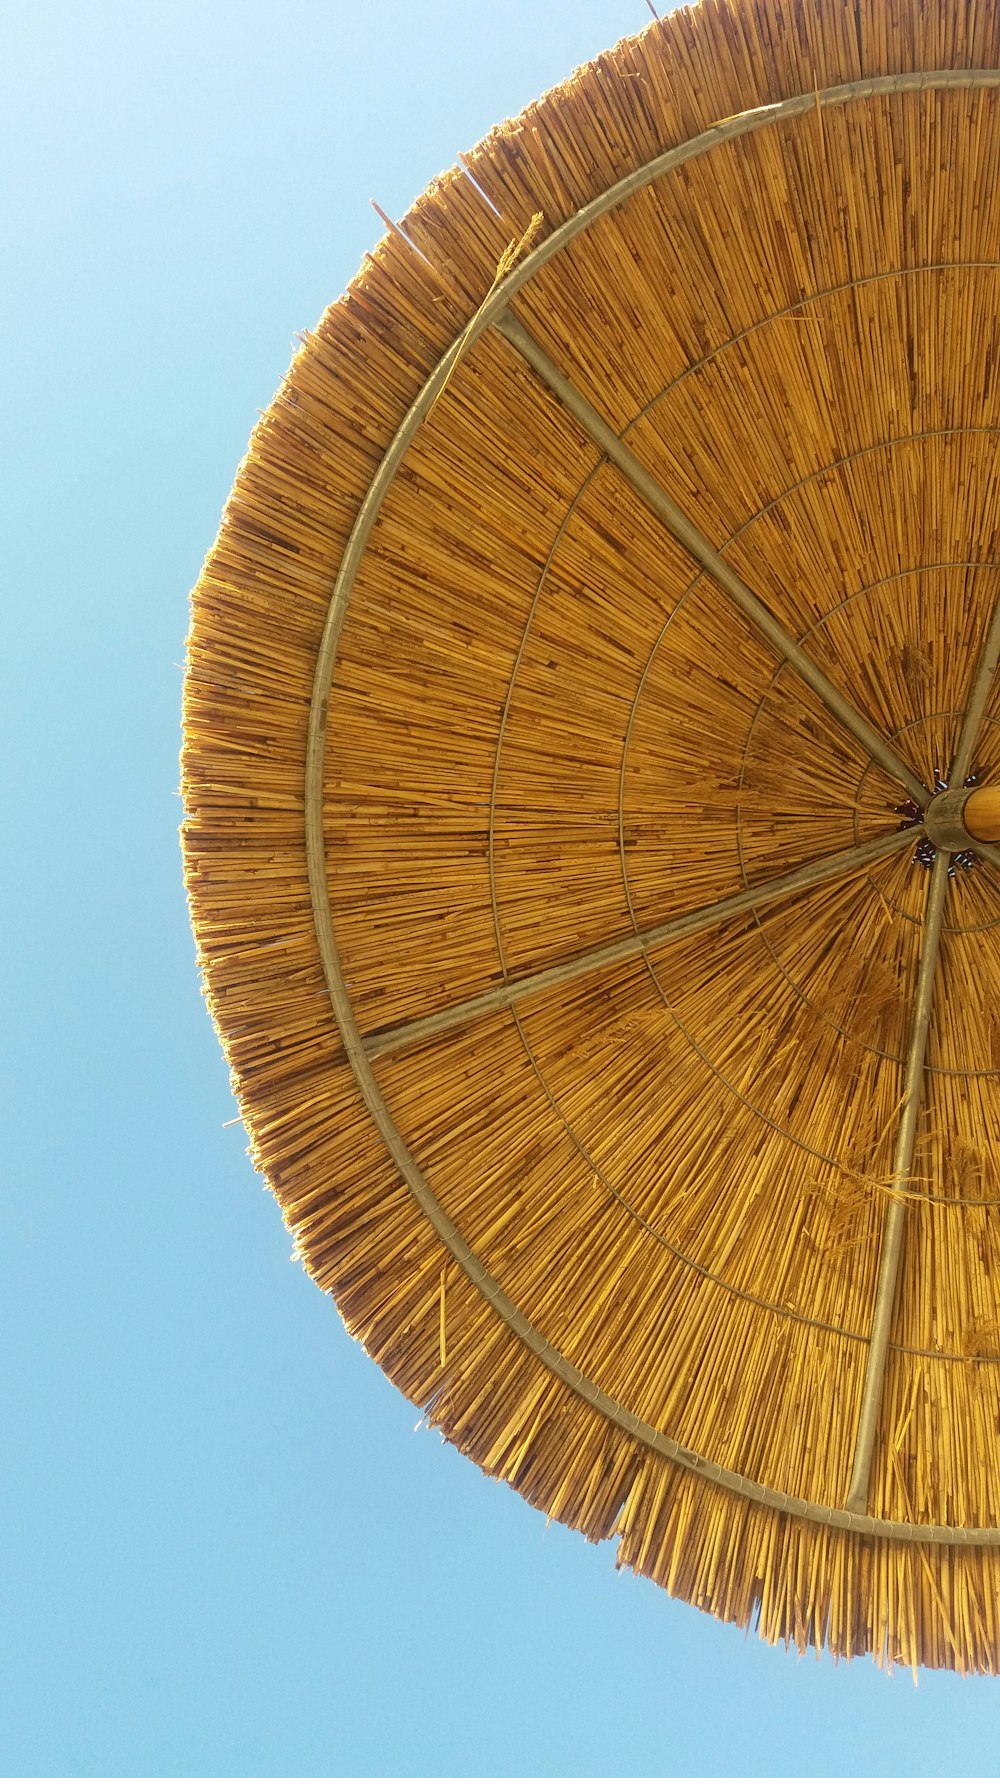 worm's-eye view photography of beige parasol